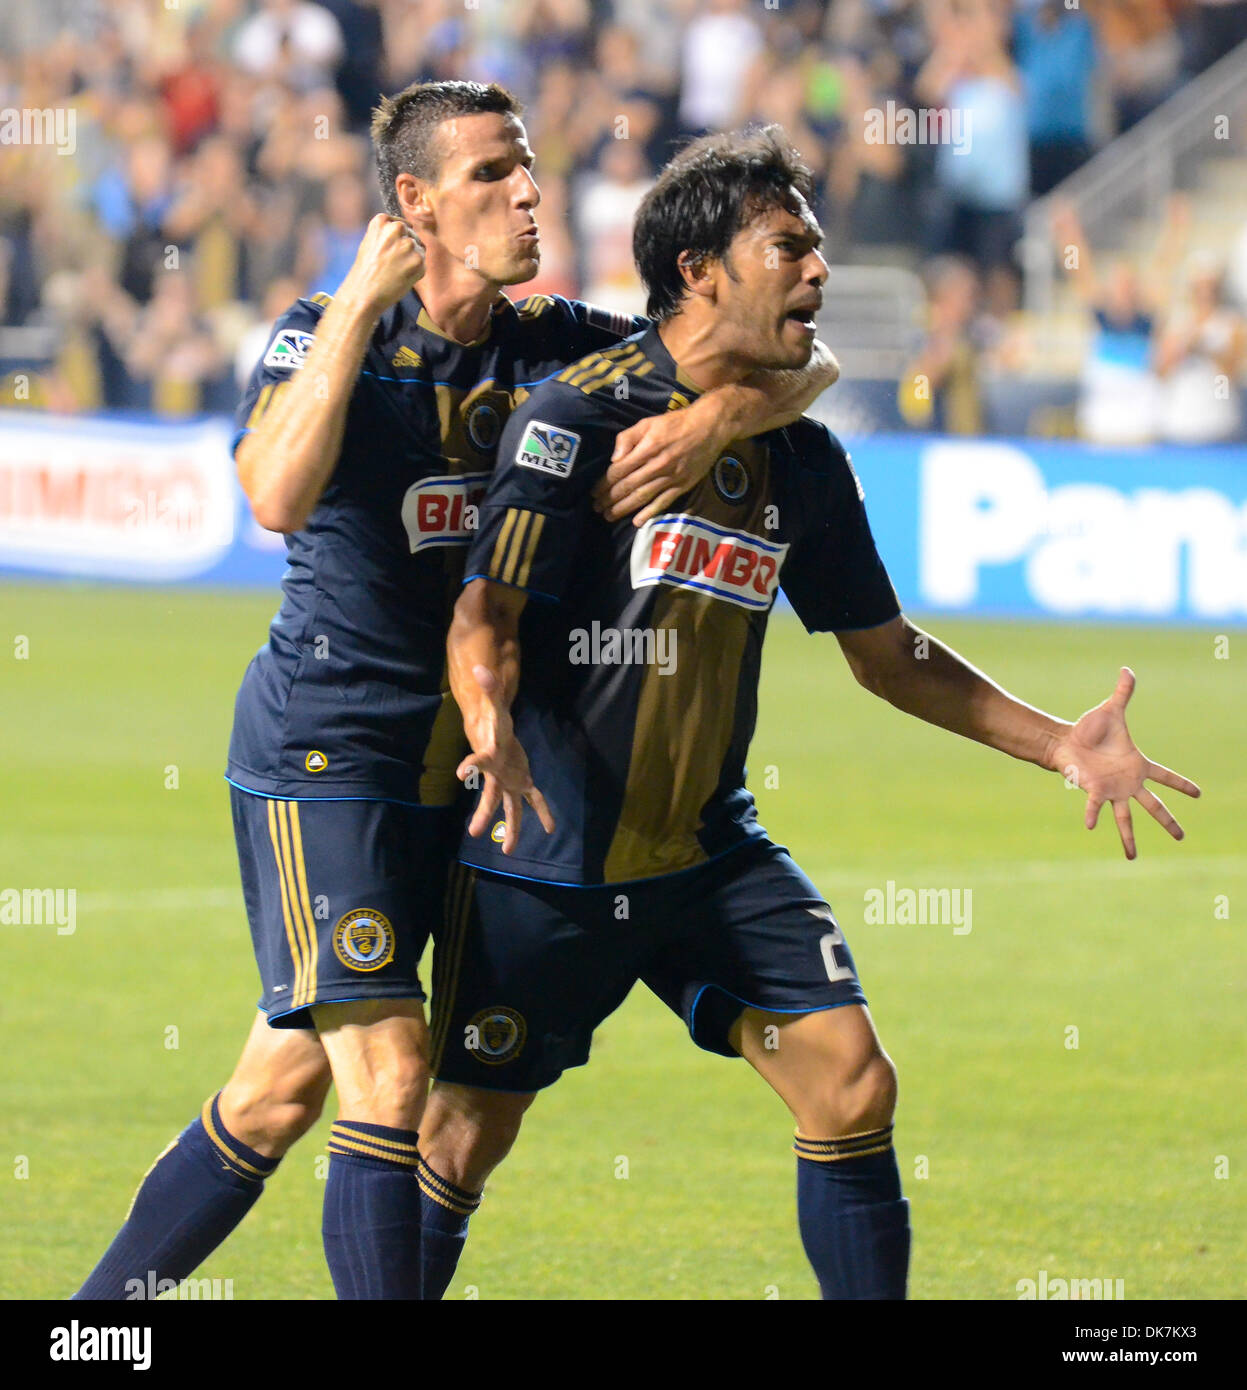 June 25, 2011 - Chester, PA, USA - Philadelphia Union's FW, CARLOS RUIZ, and SEBASTIEN LE TOUX, celebrate after RUIZ'S scores the second gaol for the Union during the match with the Philadelphia Union. The Union played Chivas USA at PPL Park in Chester Pa. The Union won the match 3-2. (Credit Image: © Ricky Fitchett/ZUMAPRESS.com) Stock Photo